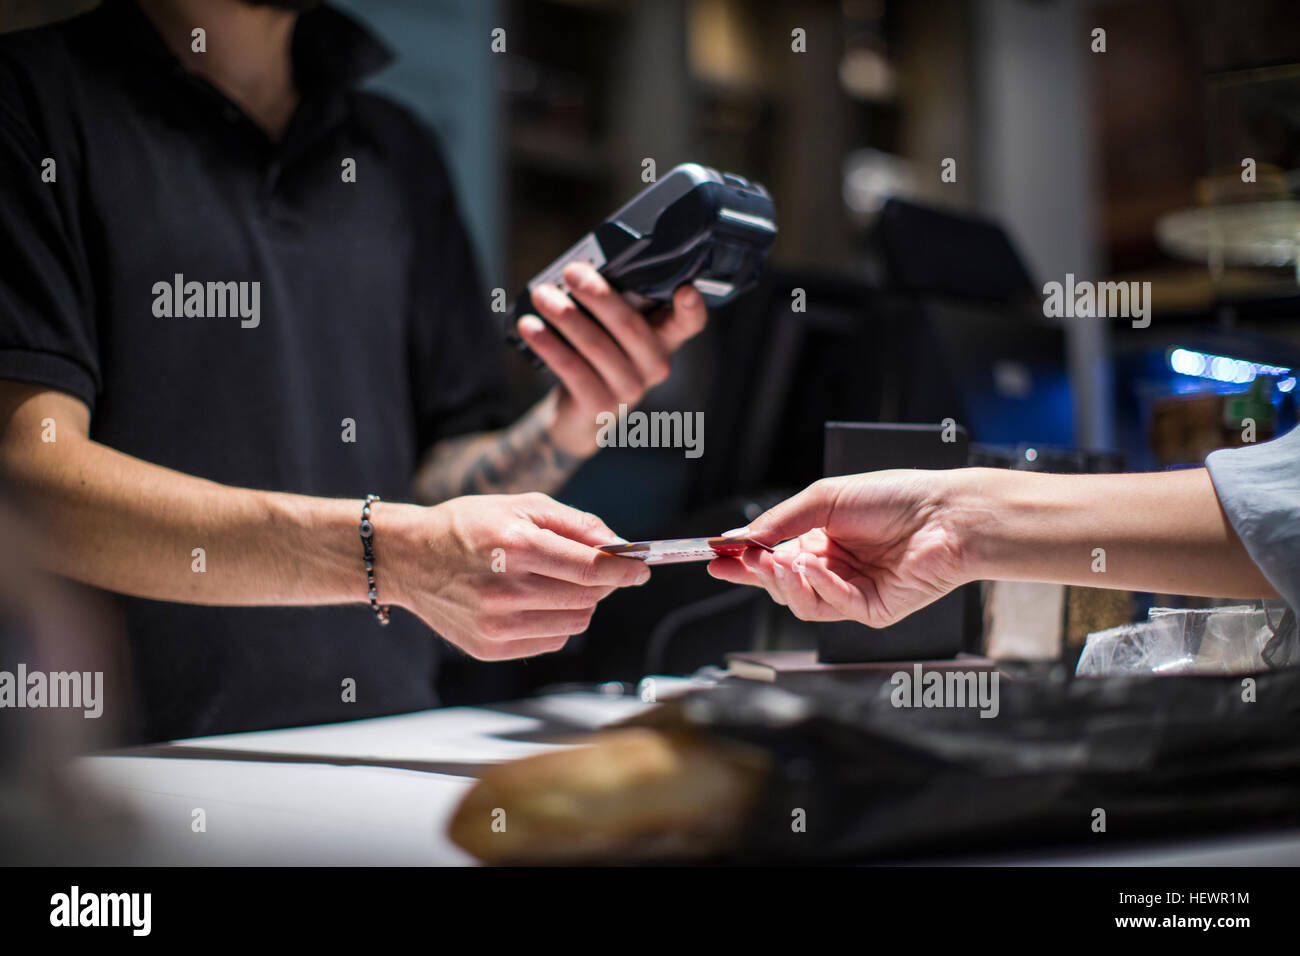 Close up of barista handing credit card to female customer Stock Photo